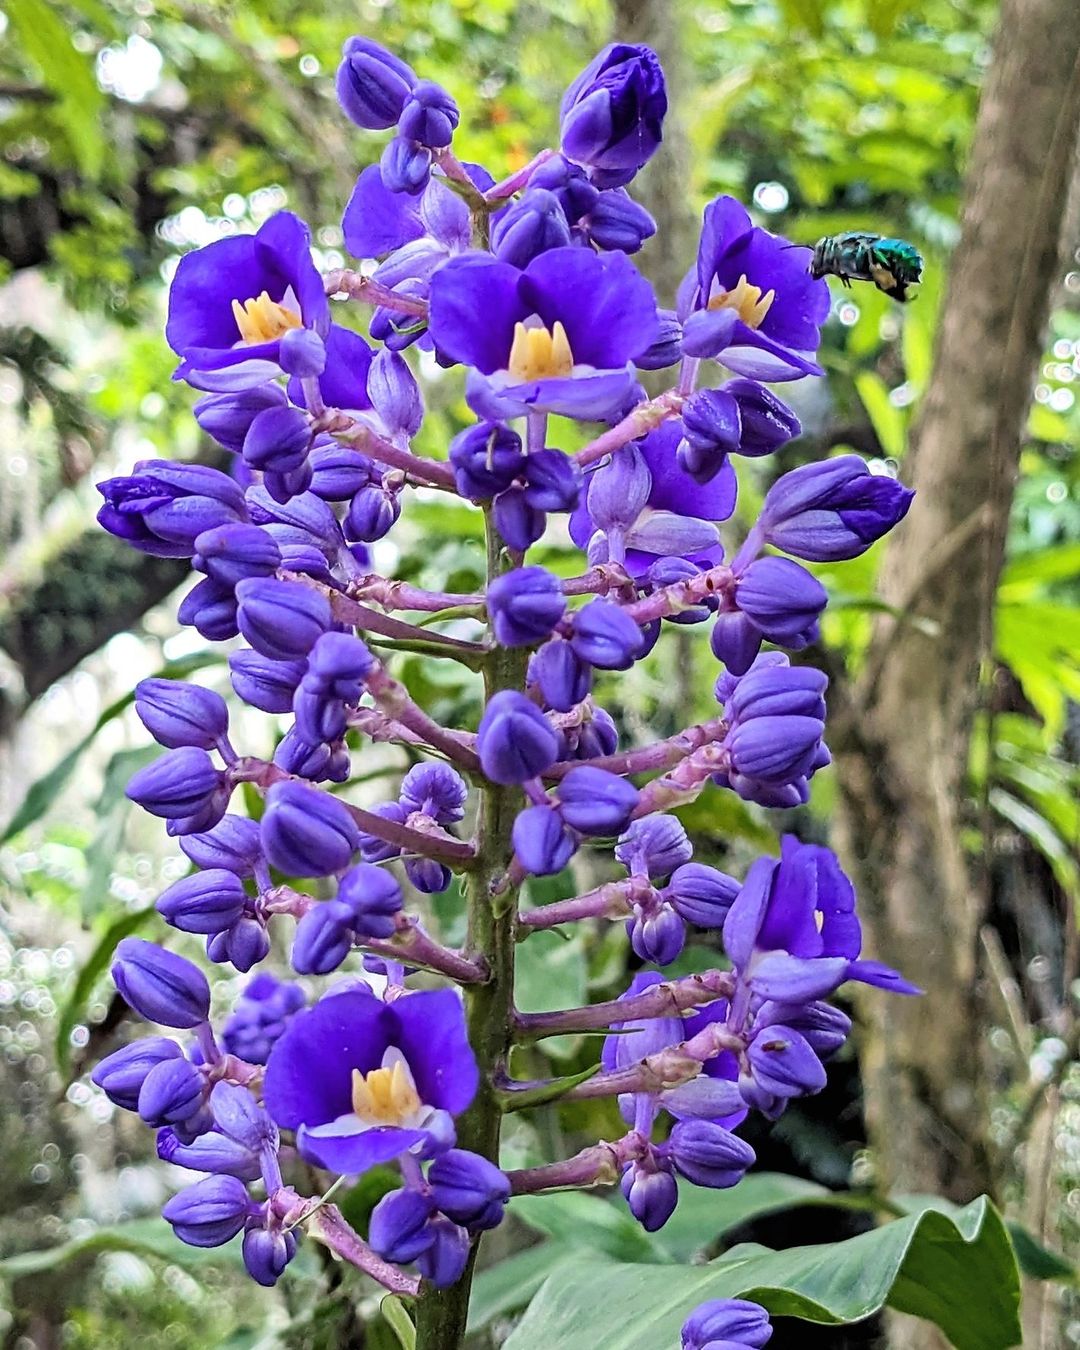 Vibrant Blue Ginger bloom with yellow centers in a green garden.